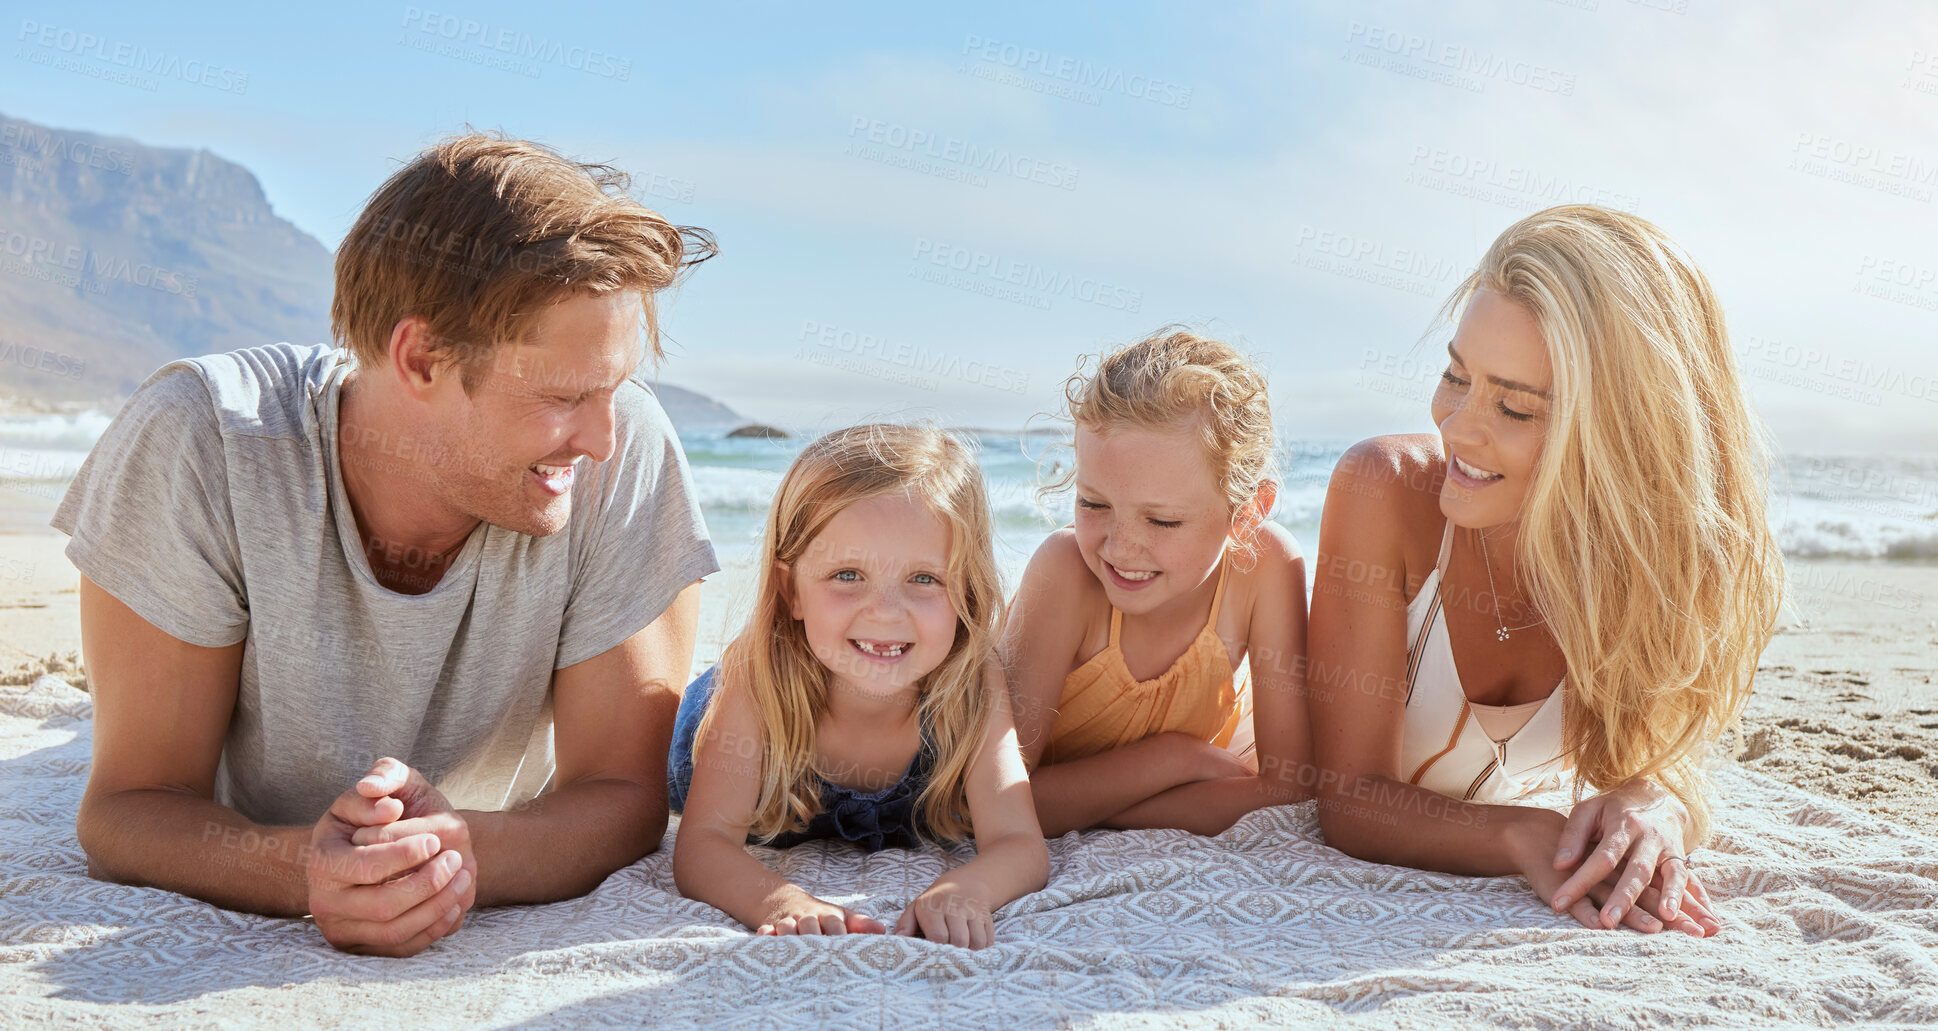 Buy stock photo Portrait of a carefree family relaxing and bonding on the beach. Cheerful little girls having fun with their mother and father on holiday. Mom and dad admiring their daughters on vacation at seashore